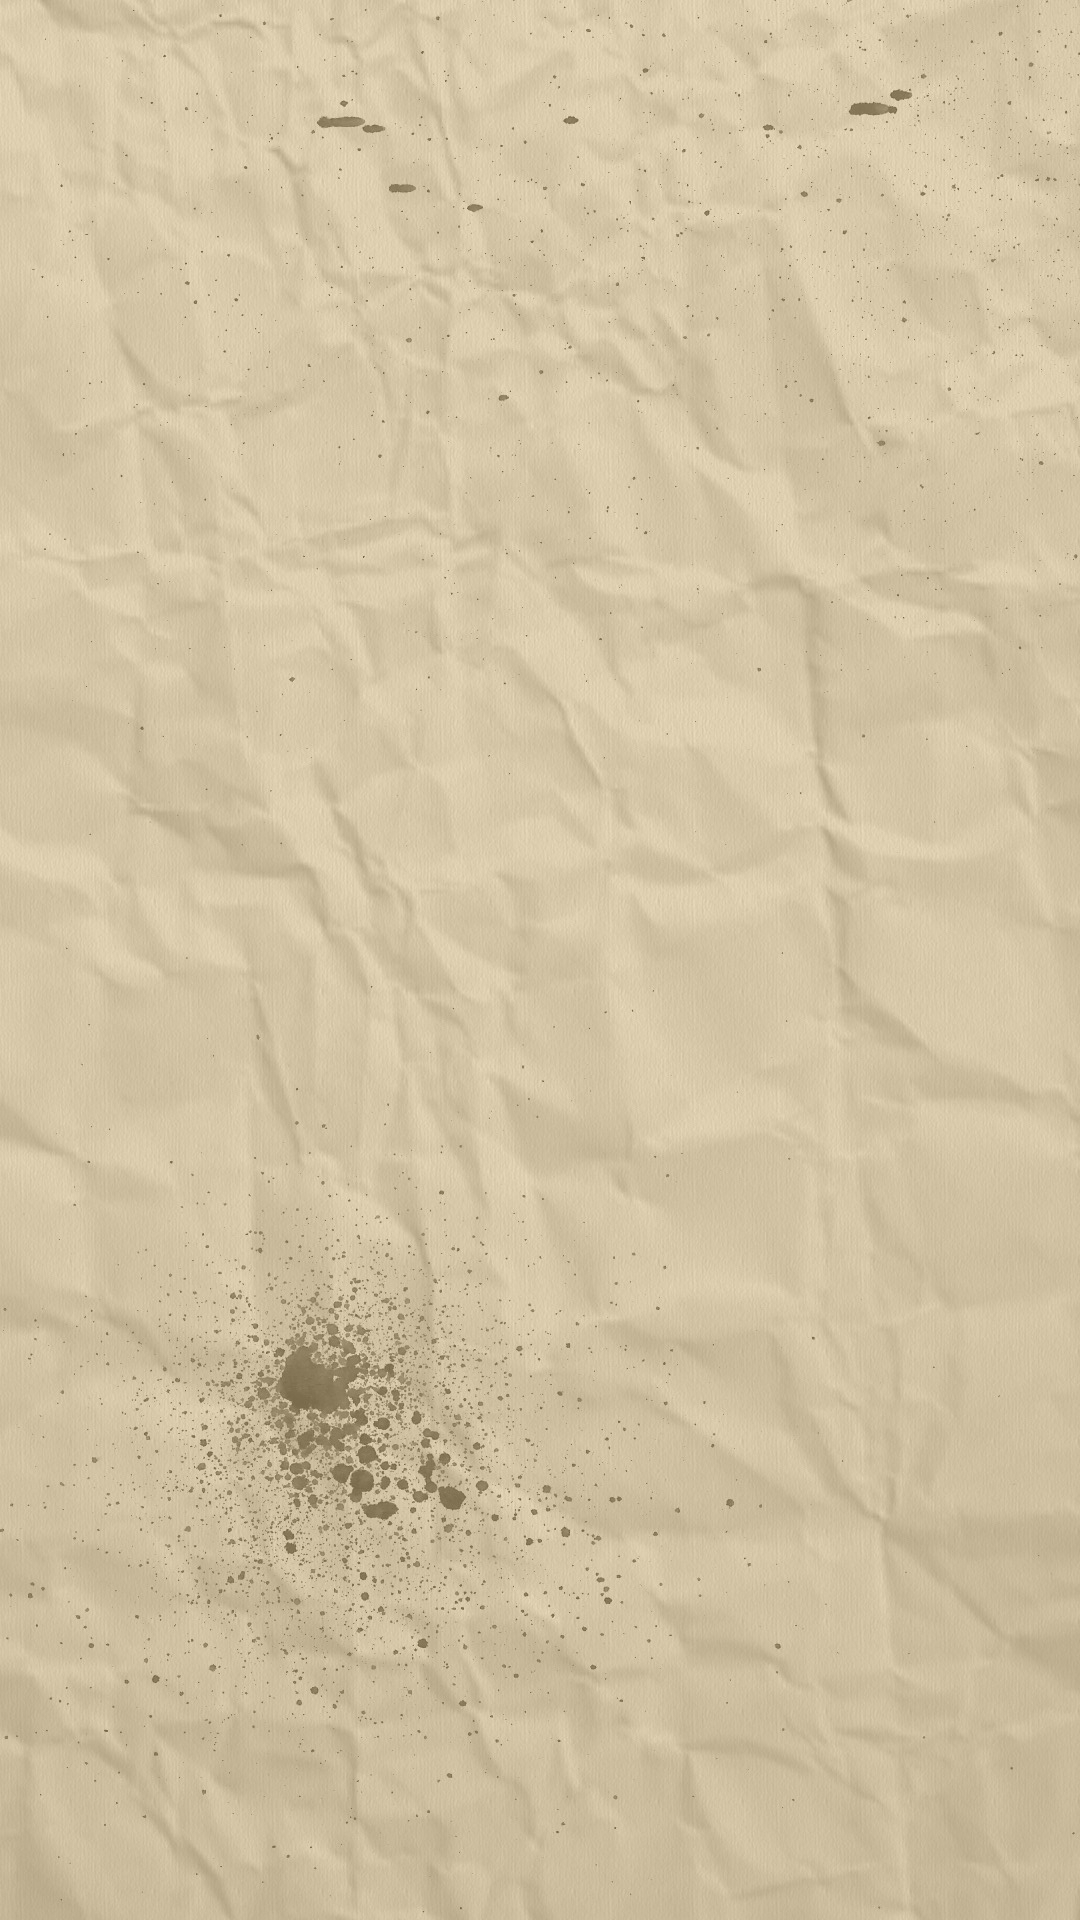 Paper texture galaxy s4 background. smartphone wallpaper in 1080x1920 resolution